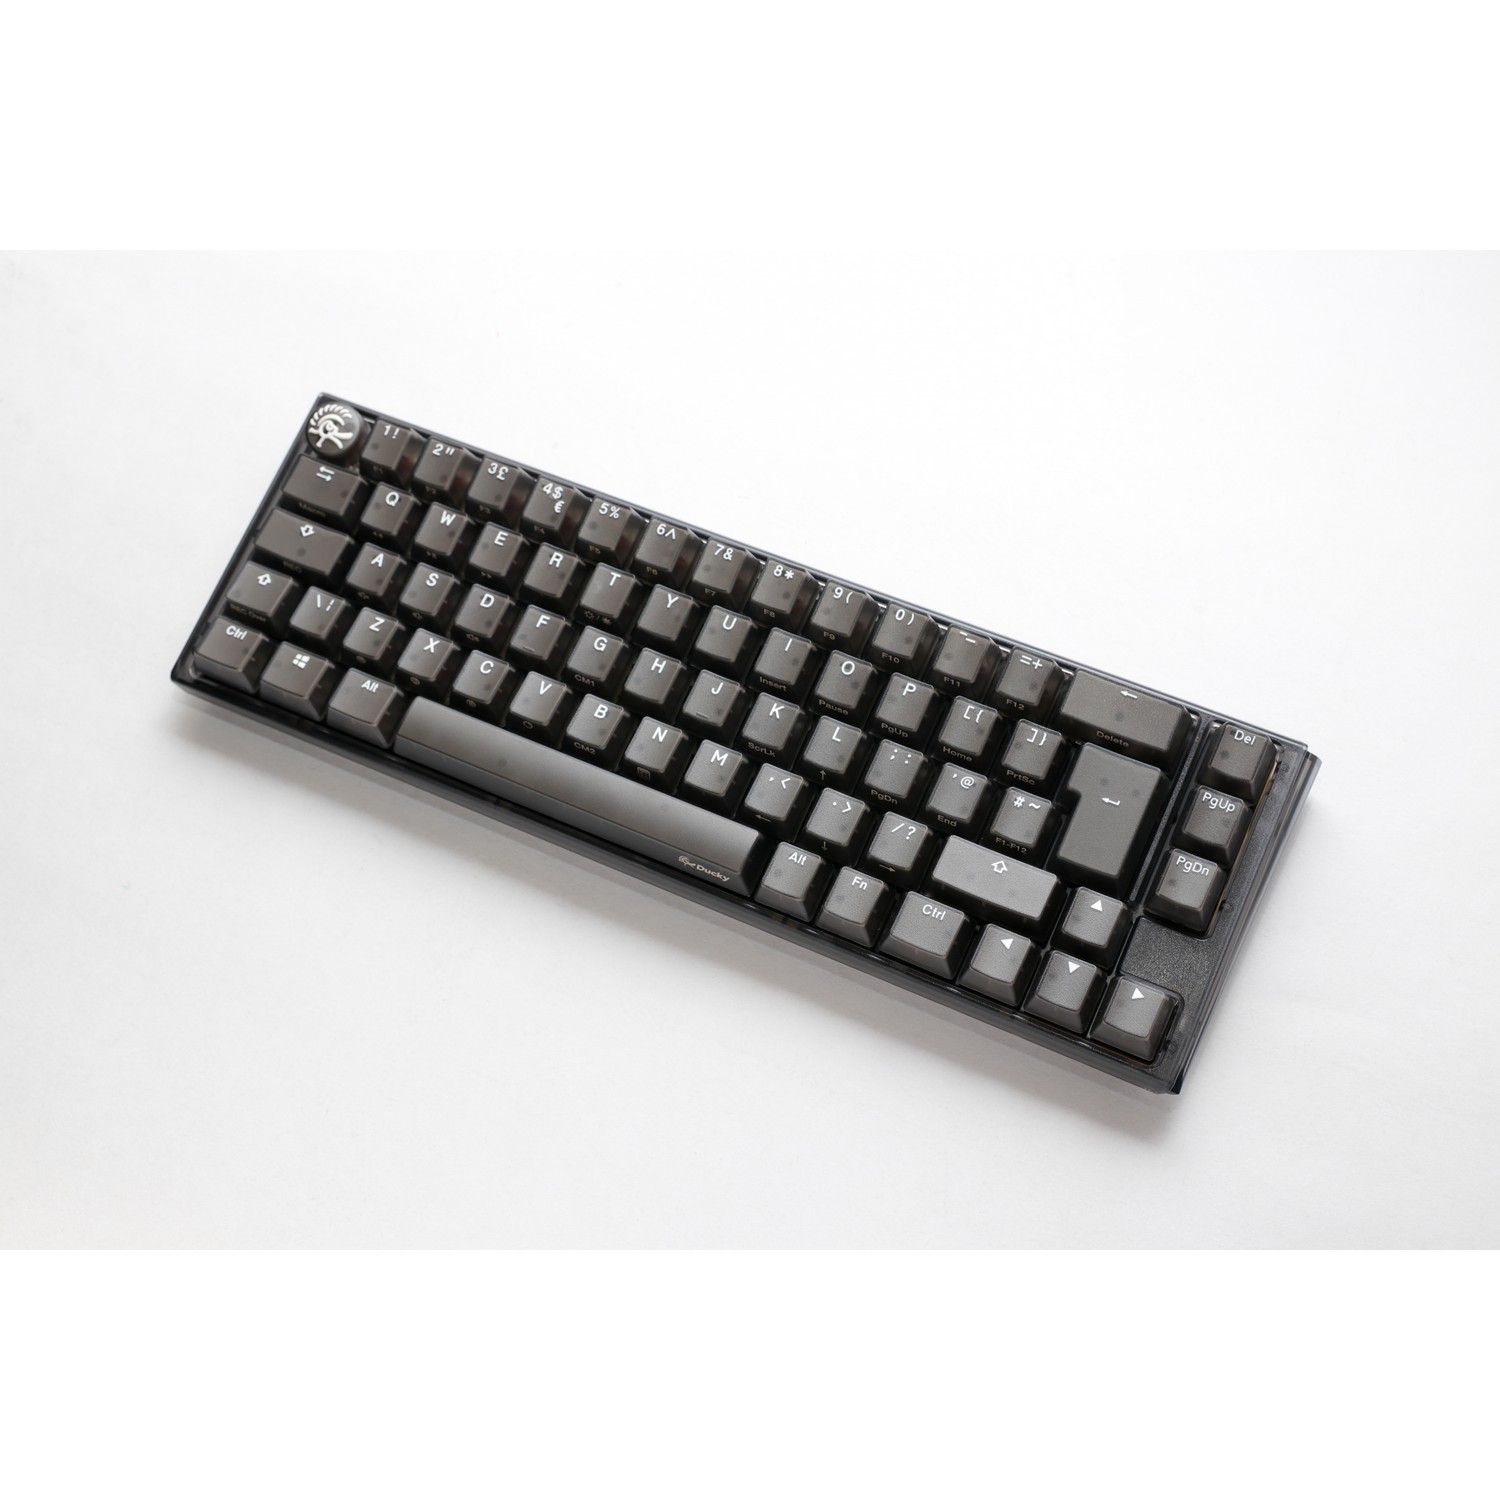 Ducky - Ducky One 3 Aura SF 65% Mechanical Gaming Keyboard Black Cherry Brown Switch UK Layout